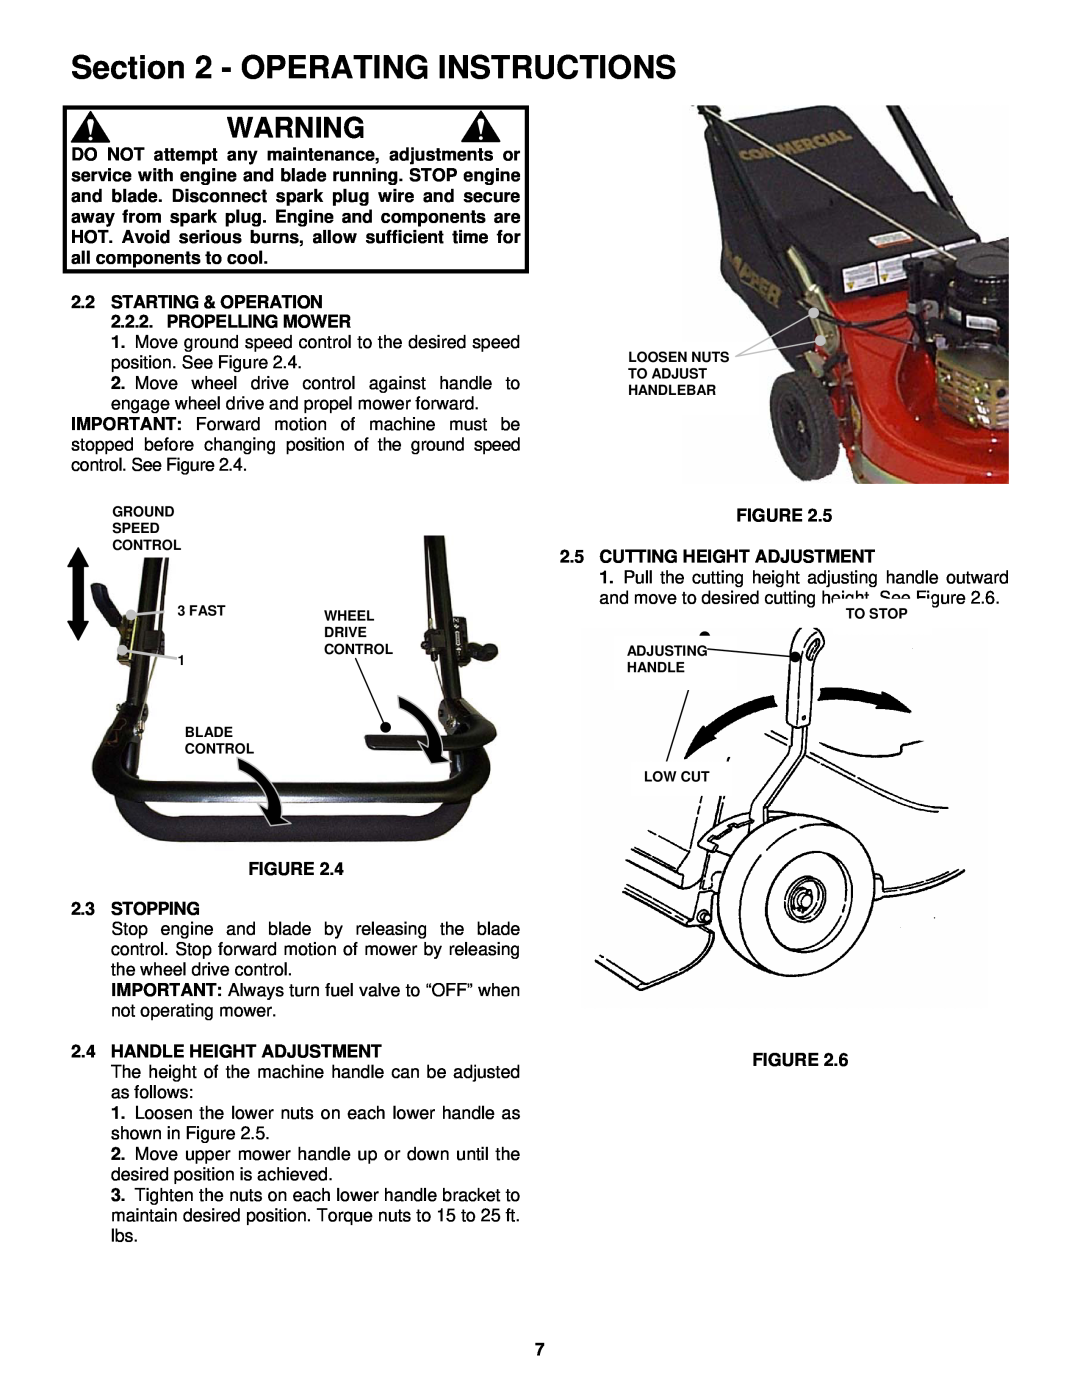 Snapper ECLP21 551HV Operating Instructions, STARTING & OPERATION 2.2.2. PROPELLING MOWER, Stopping 